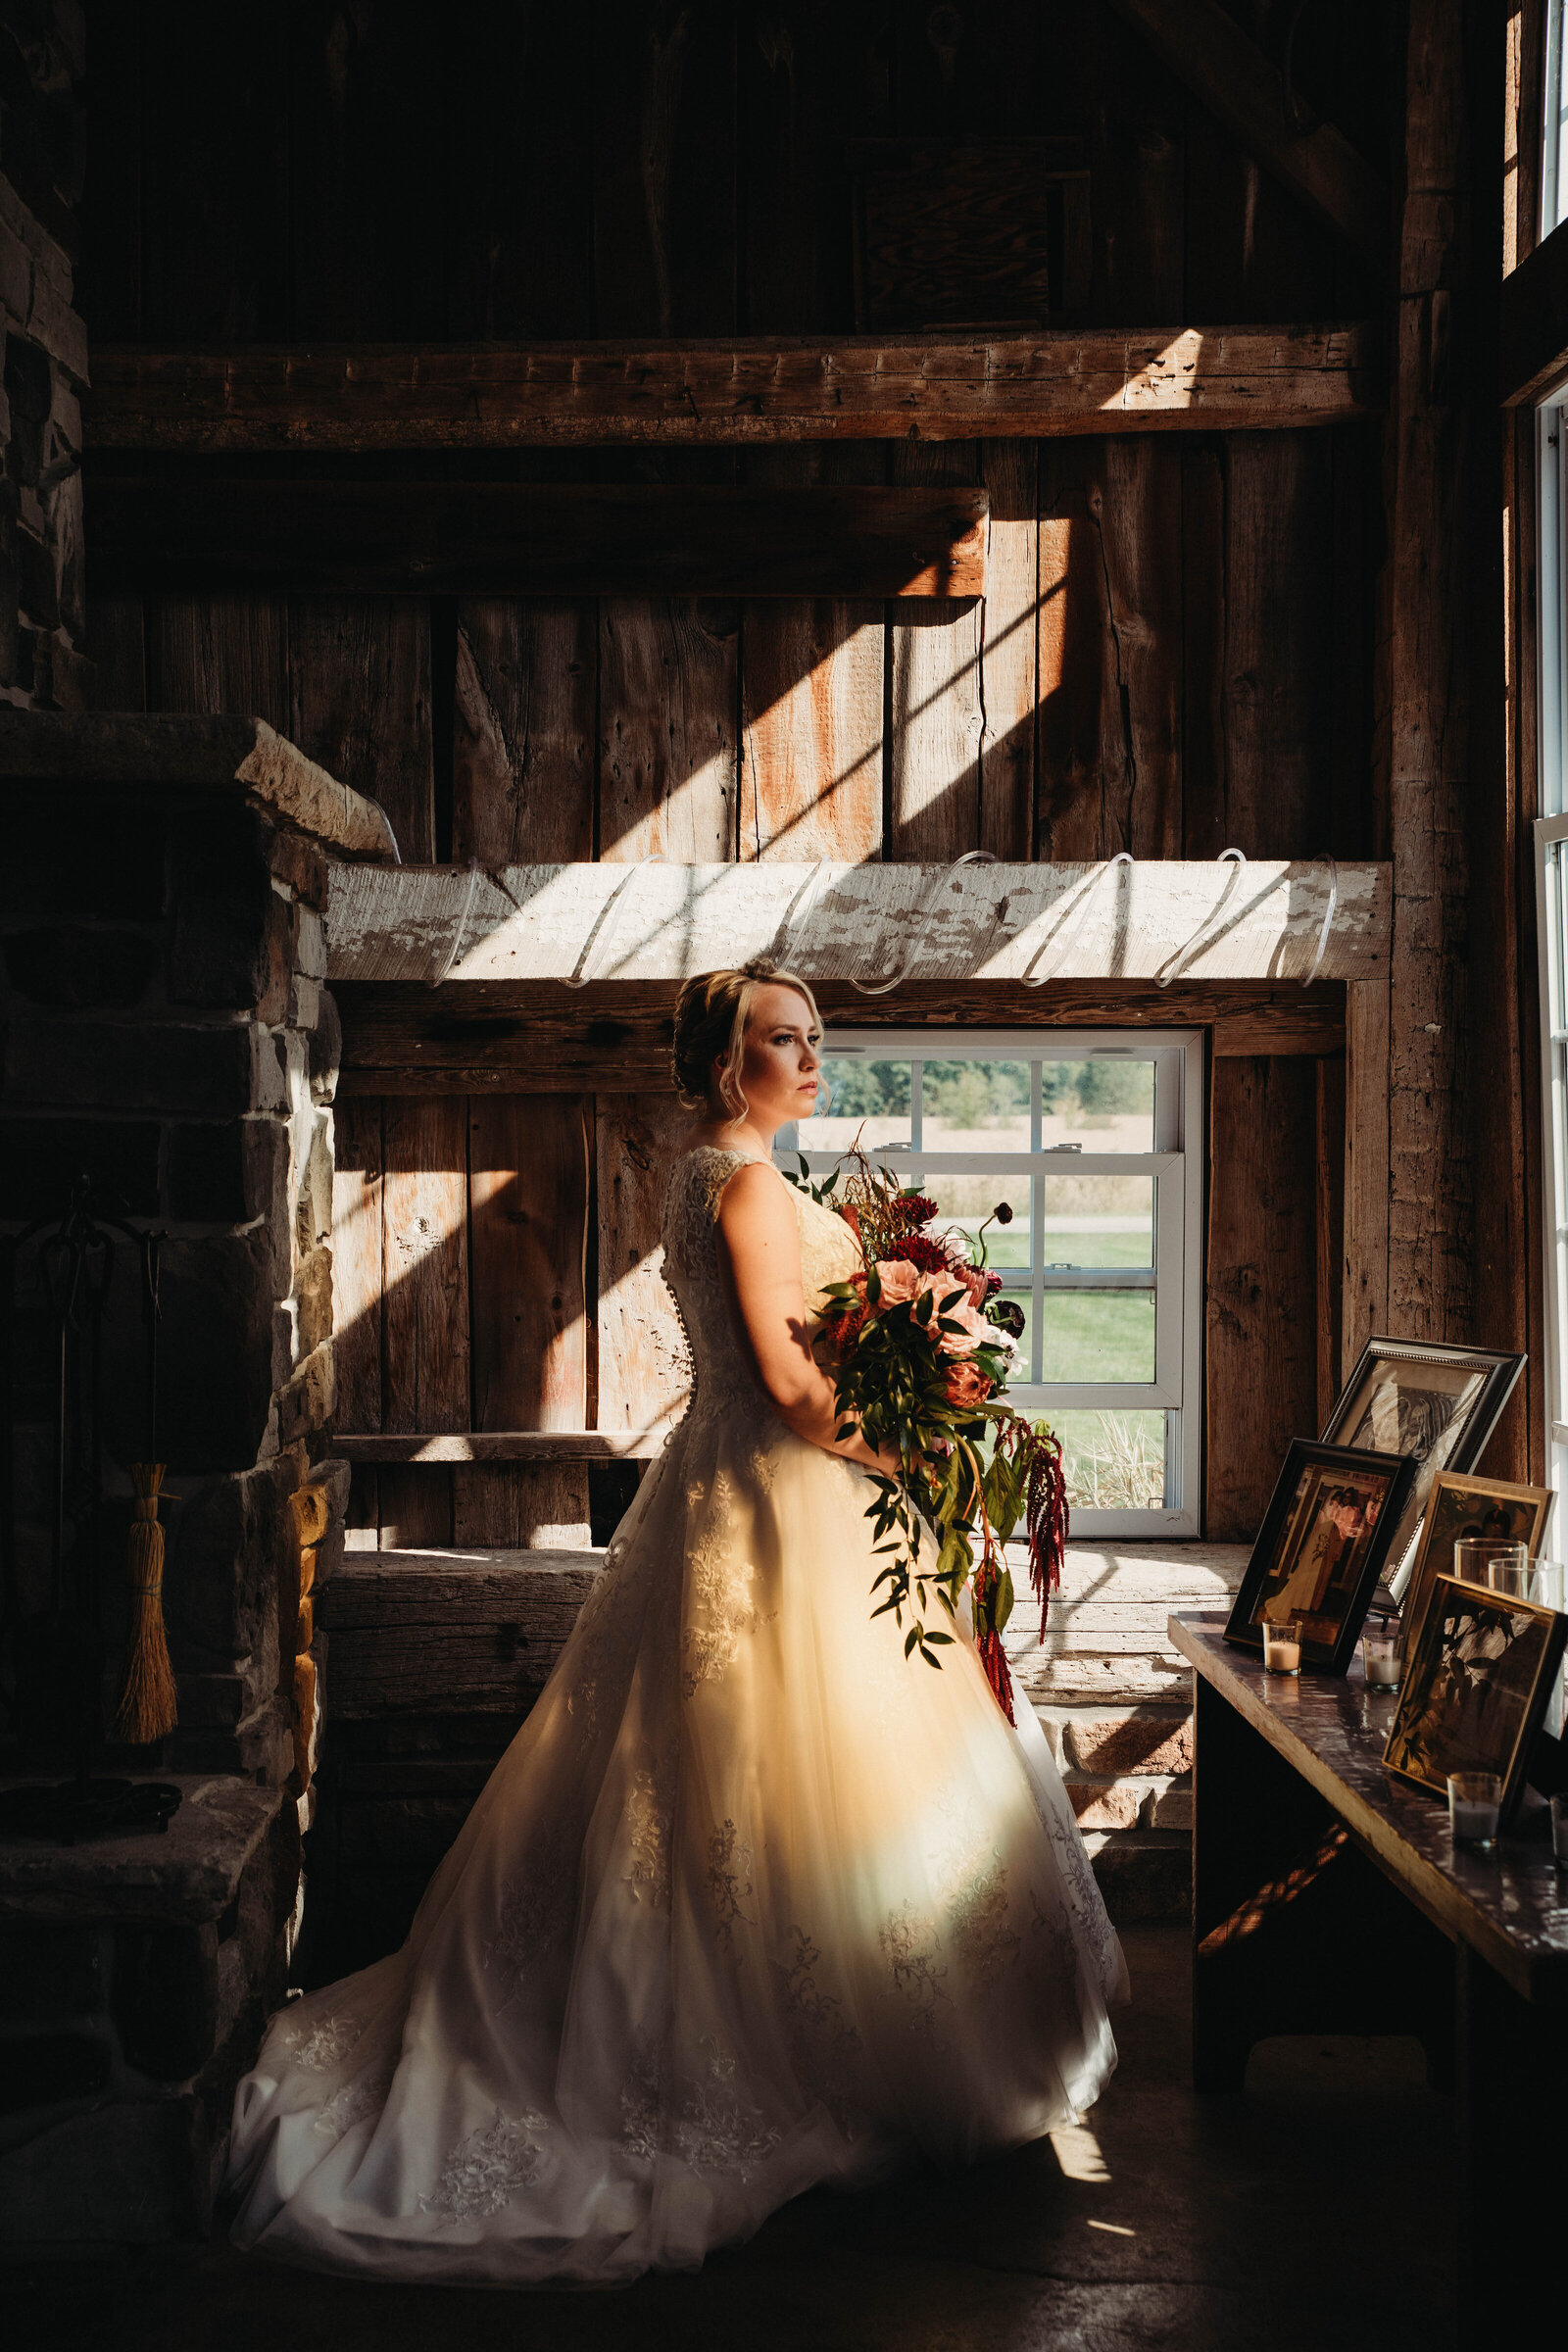 Bride stands in stained glass light at barn.